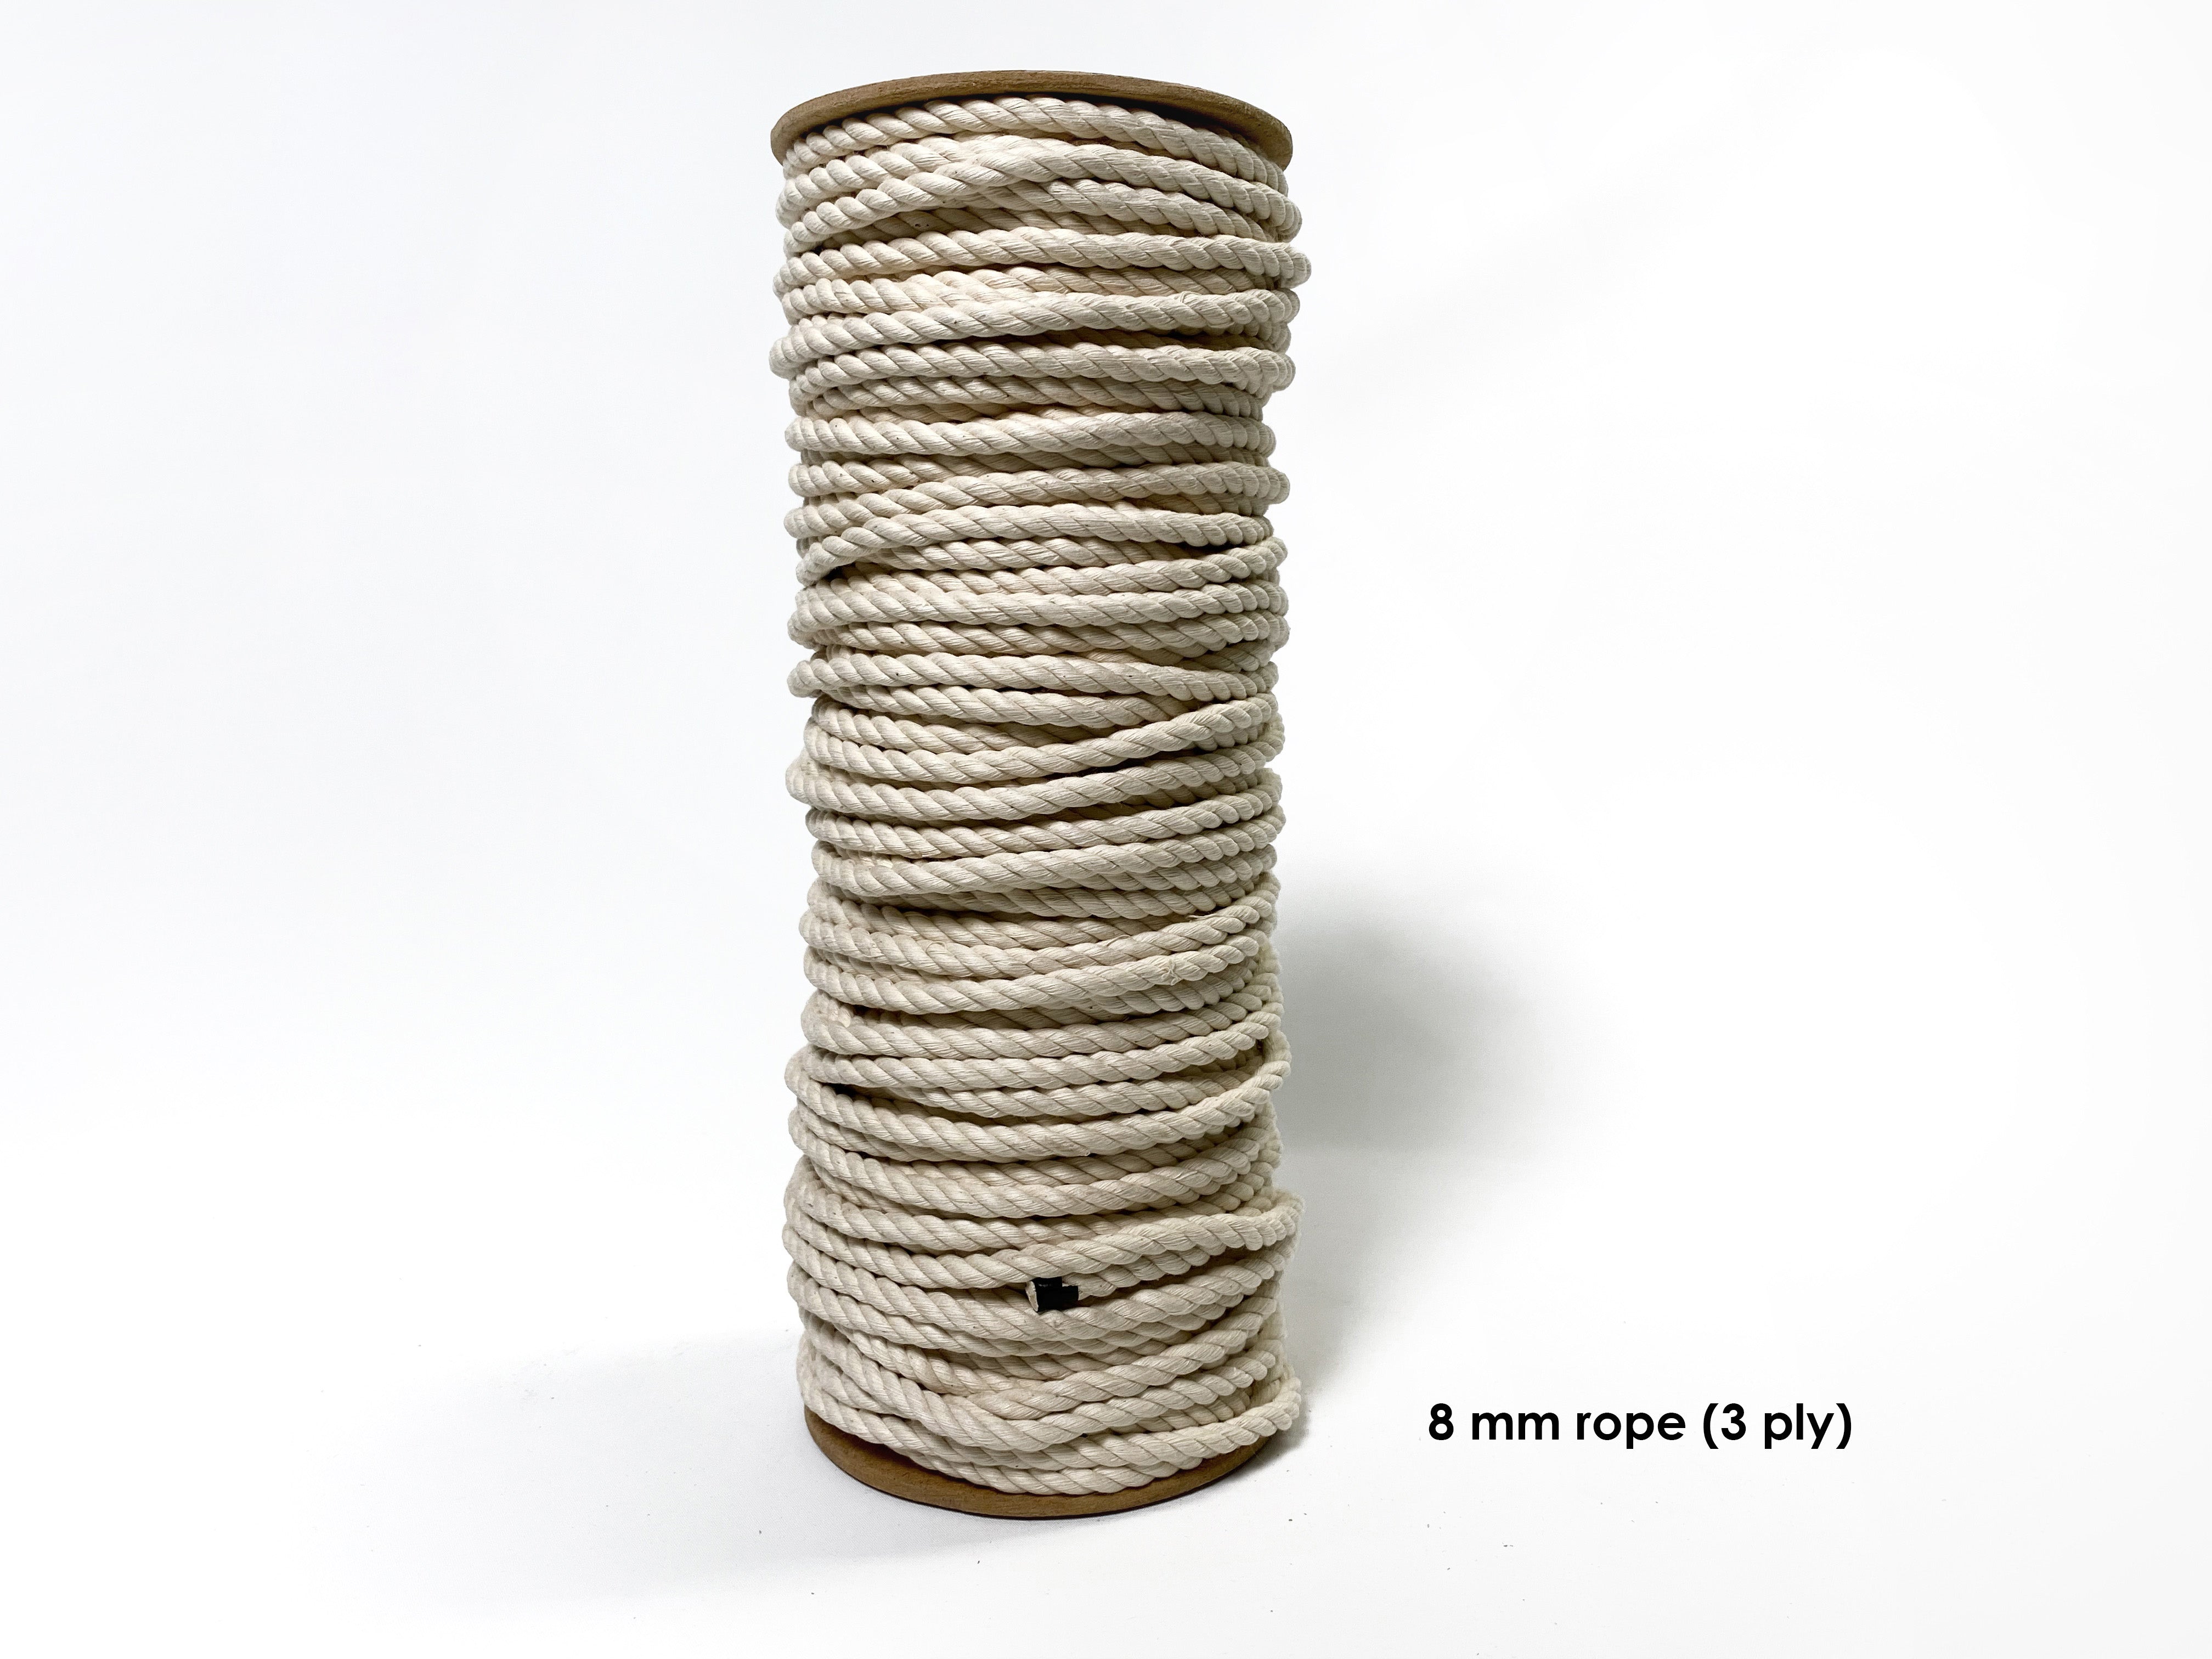 Supersoft String & Rope - Natural Cotton (3 mm to 25 mm)